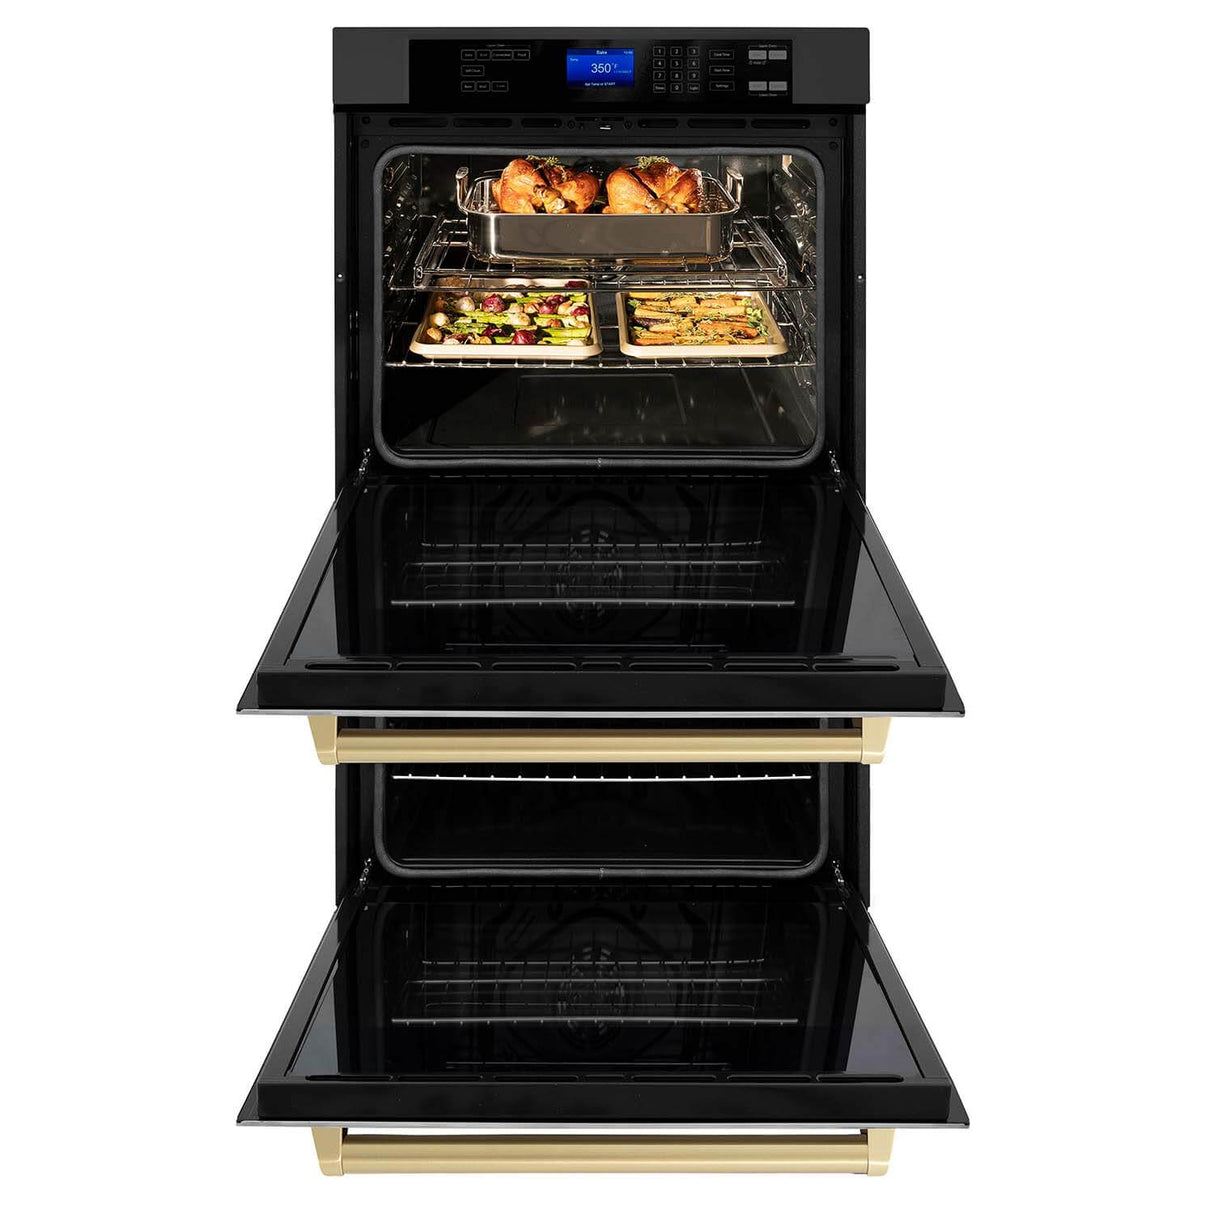 ZLINE Autograph Edition 30 in. Electric Double Wall Oven with Self Clean and True Convection in Black Stainless Steel and Champagne Bronze Accents (AWDZ-30-BS-CB)